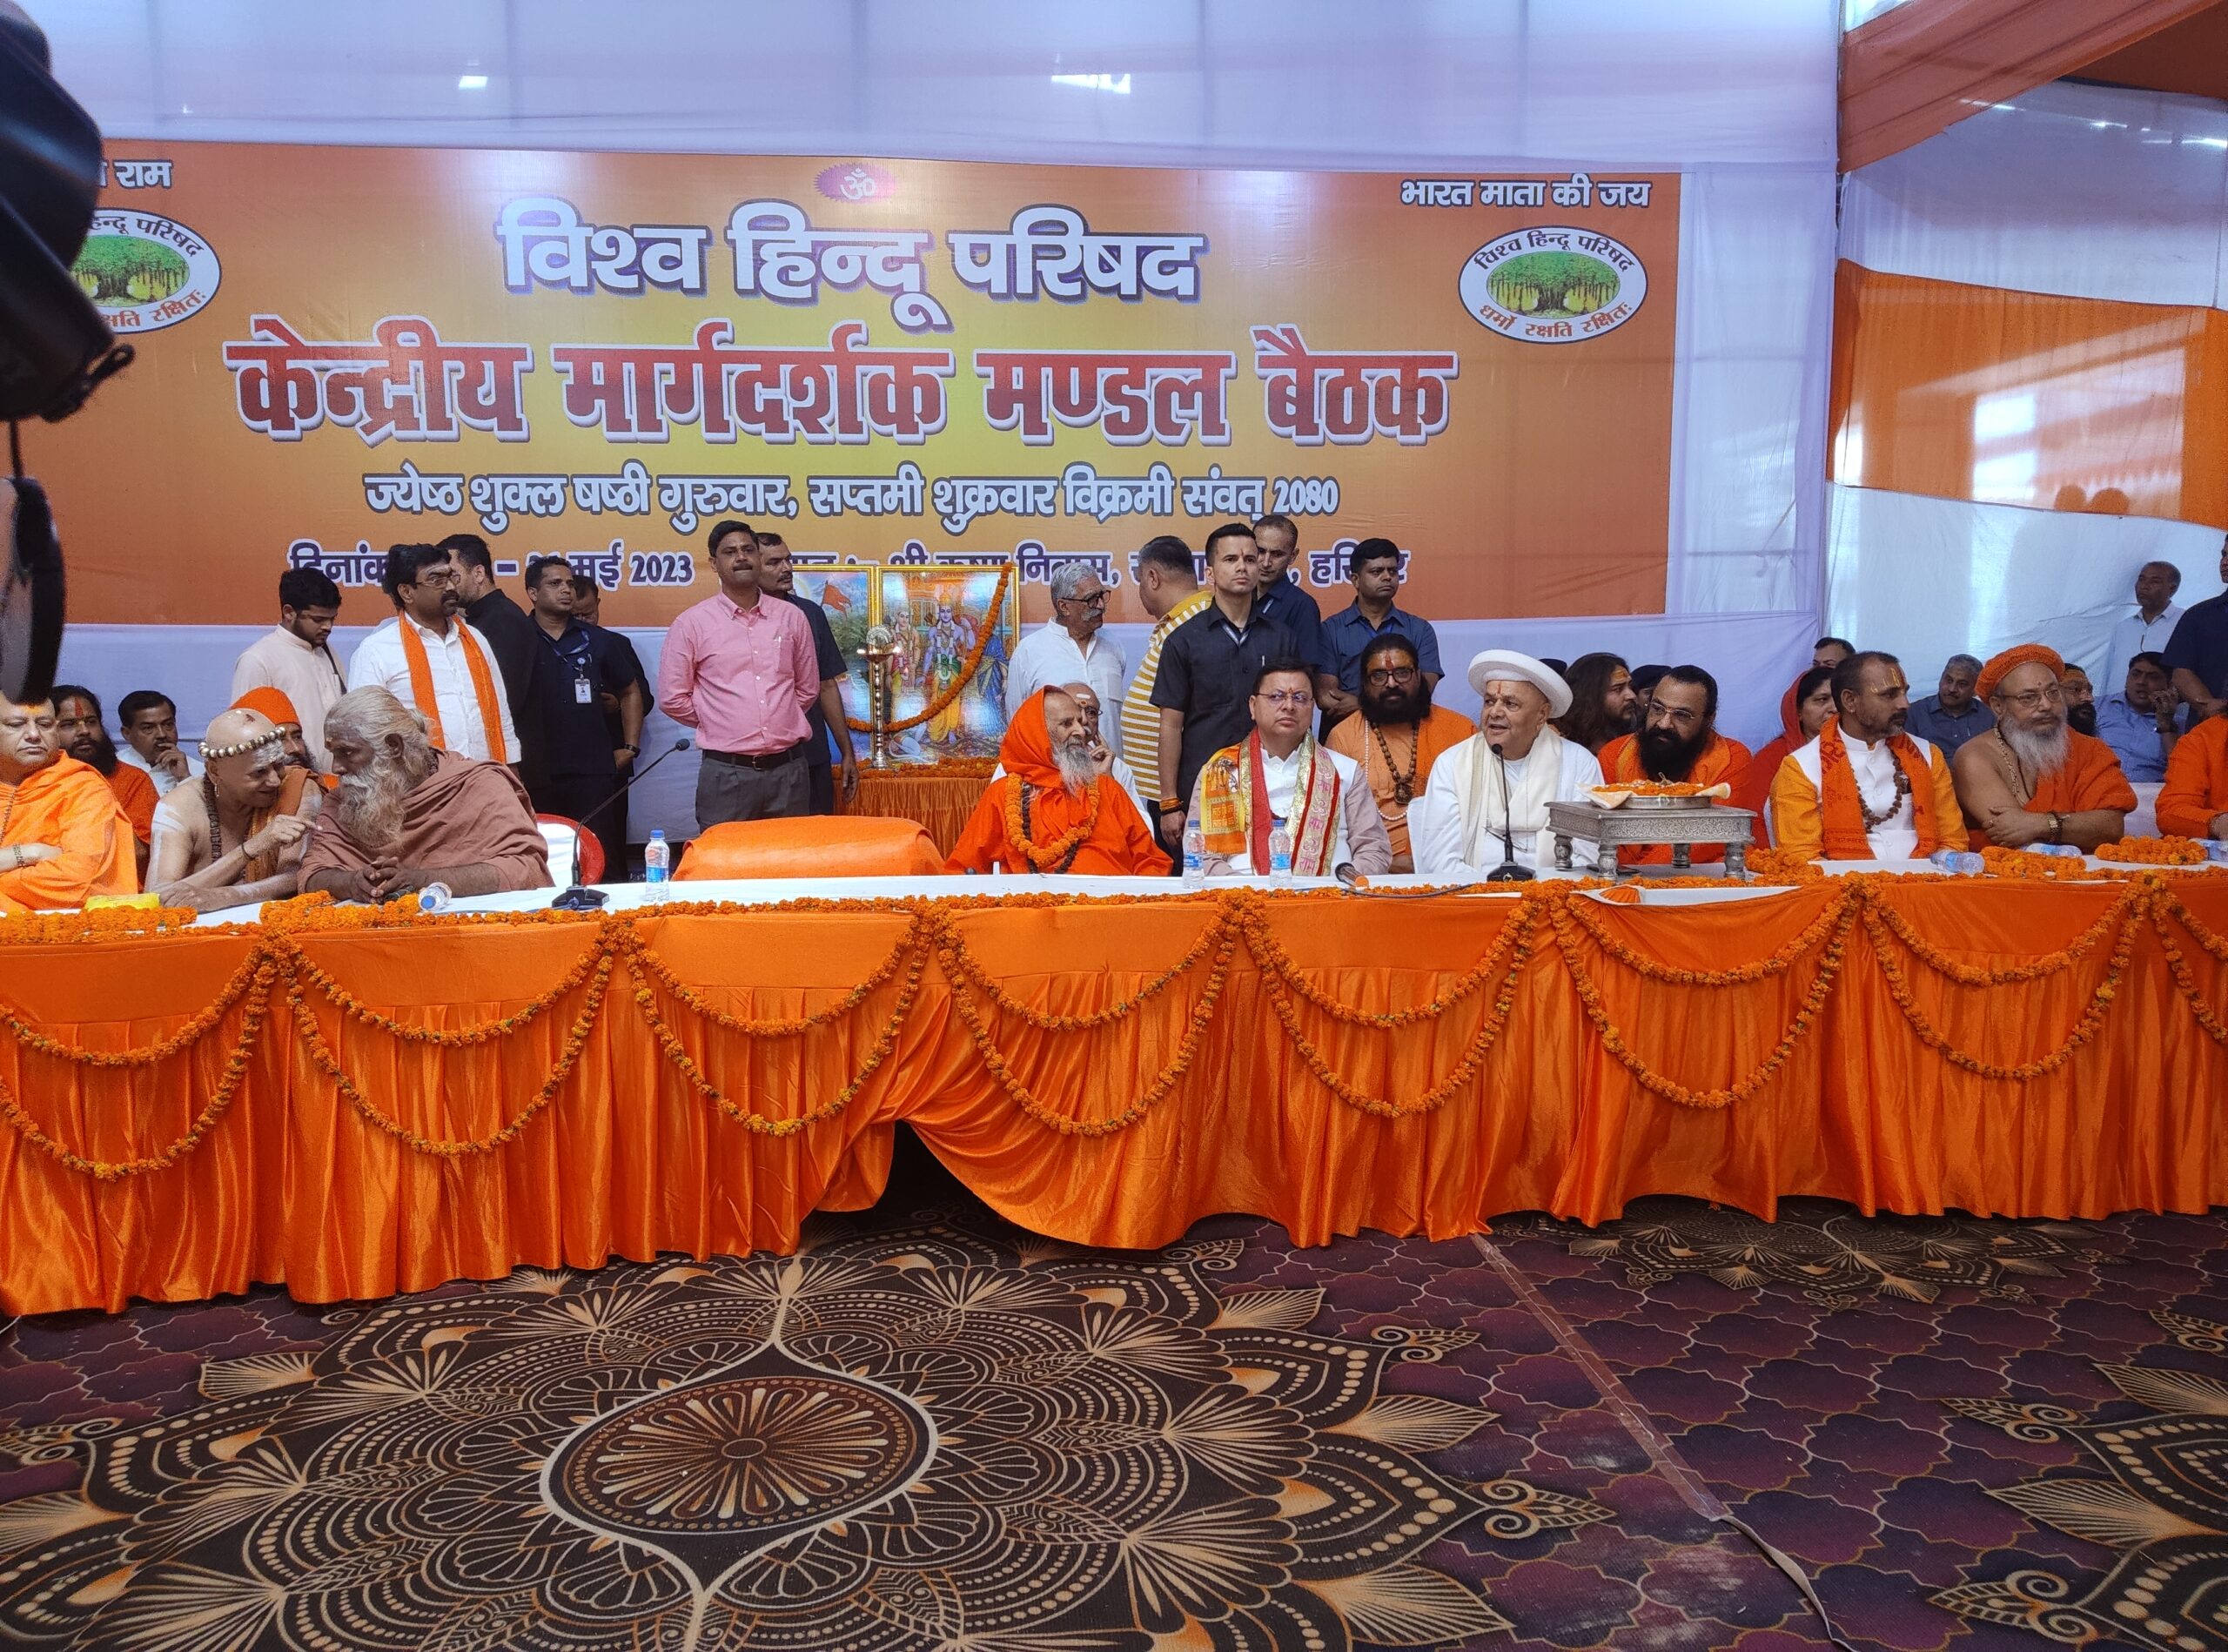 Saints present on the stage in the two-day meeting of Vishwa Hindu Parishad